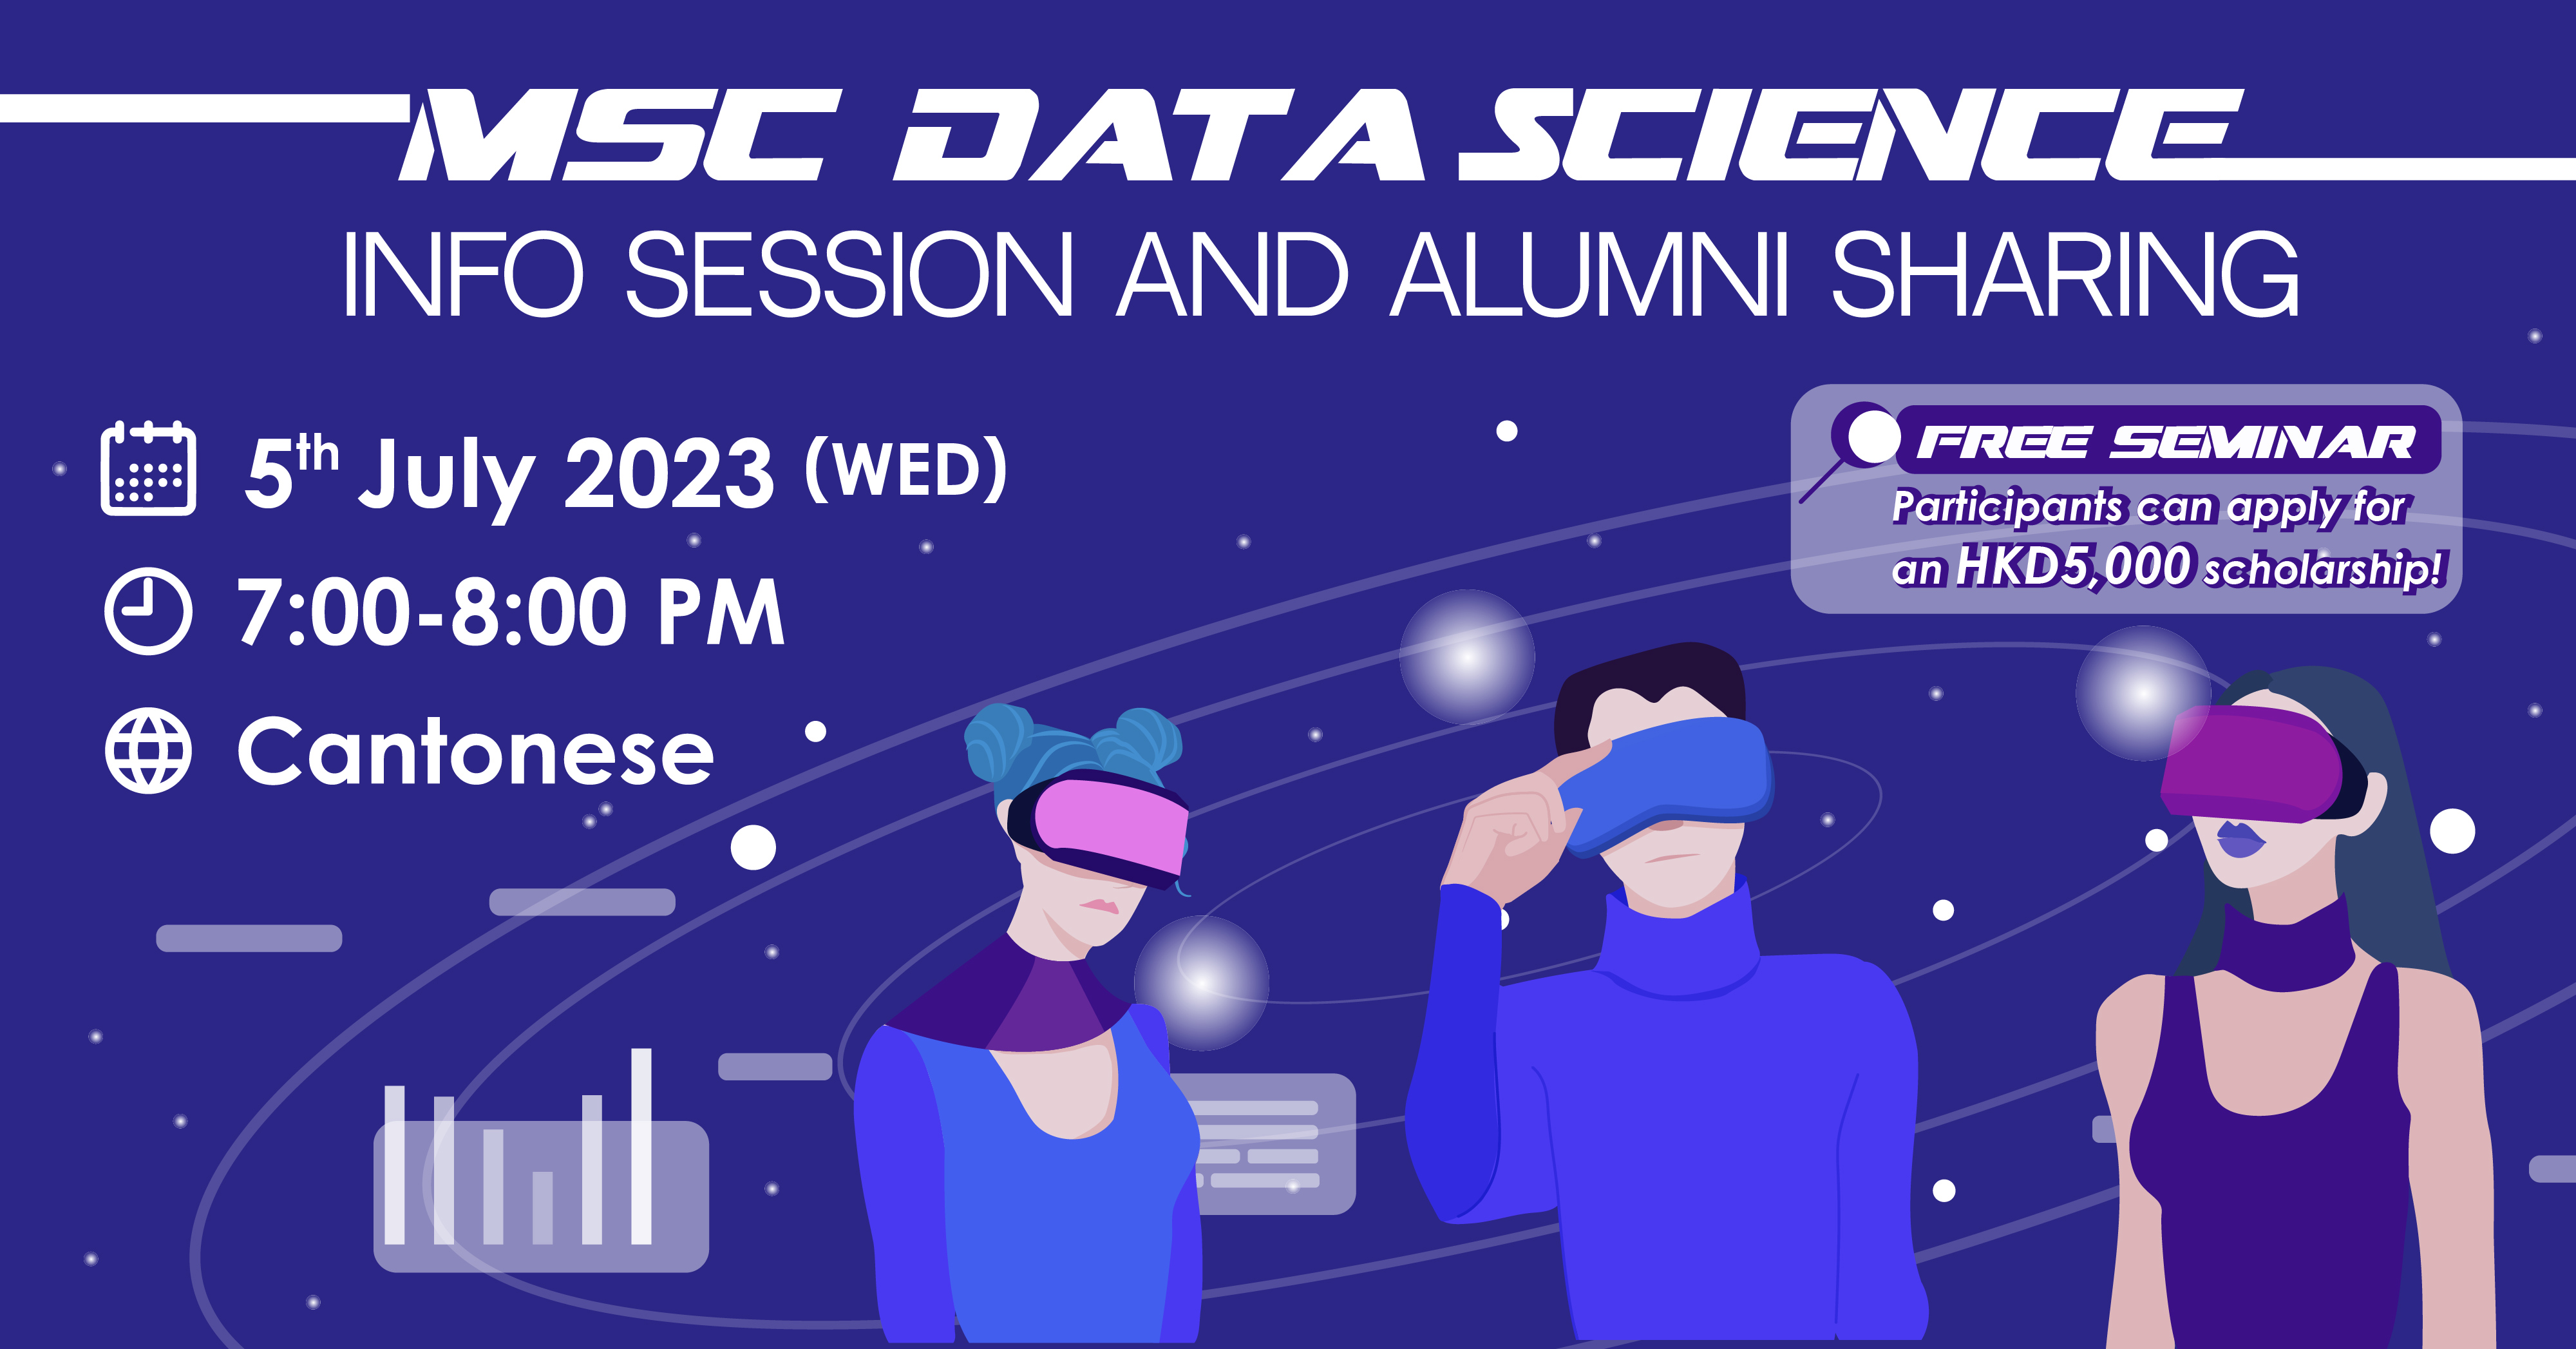 MSc Data Science Info Session and Alumni Sharing